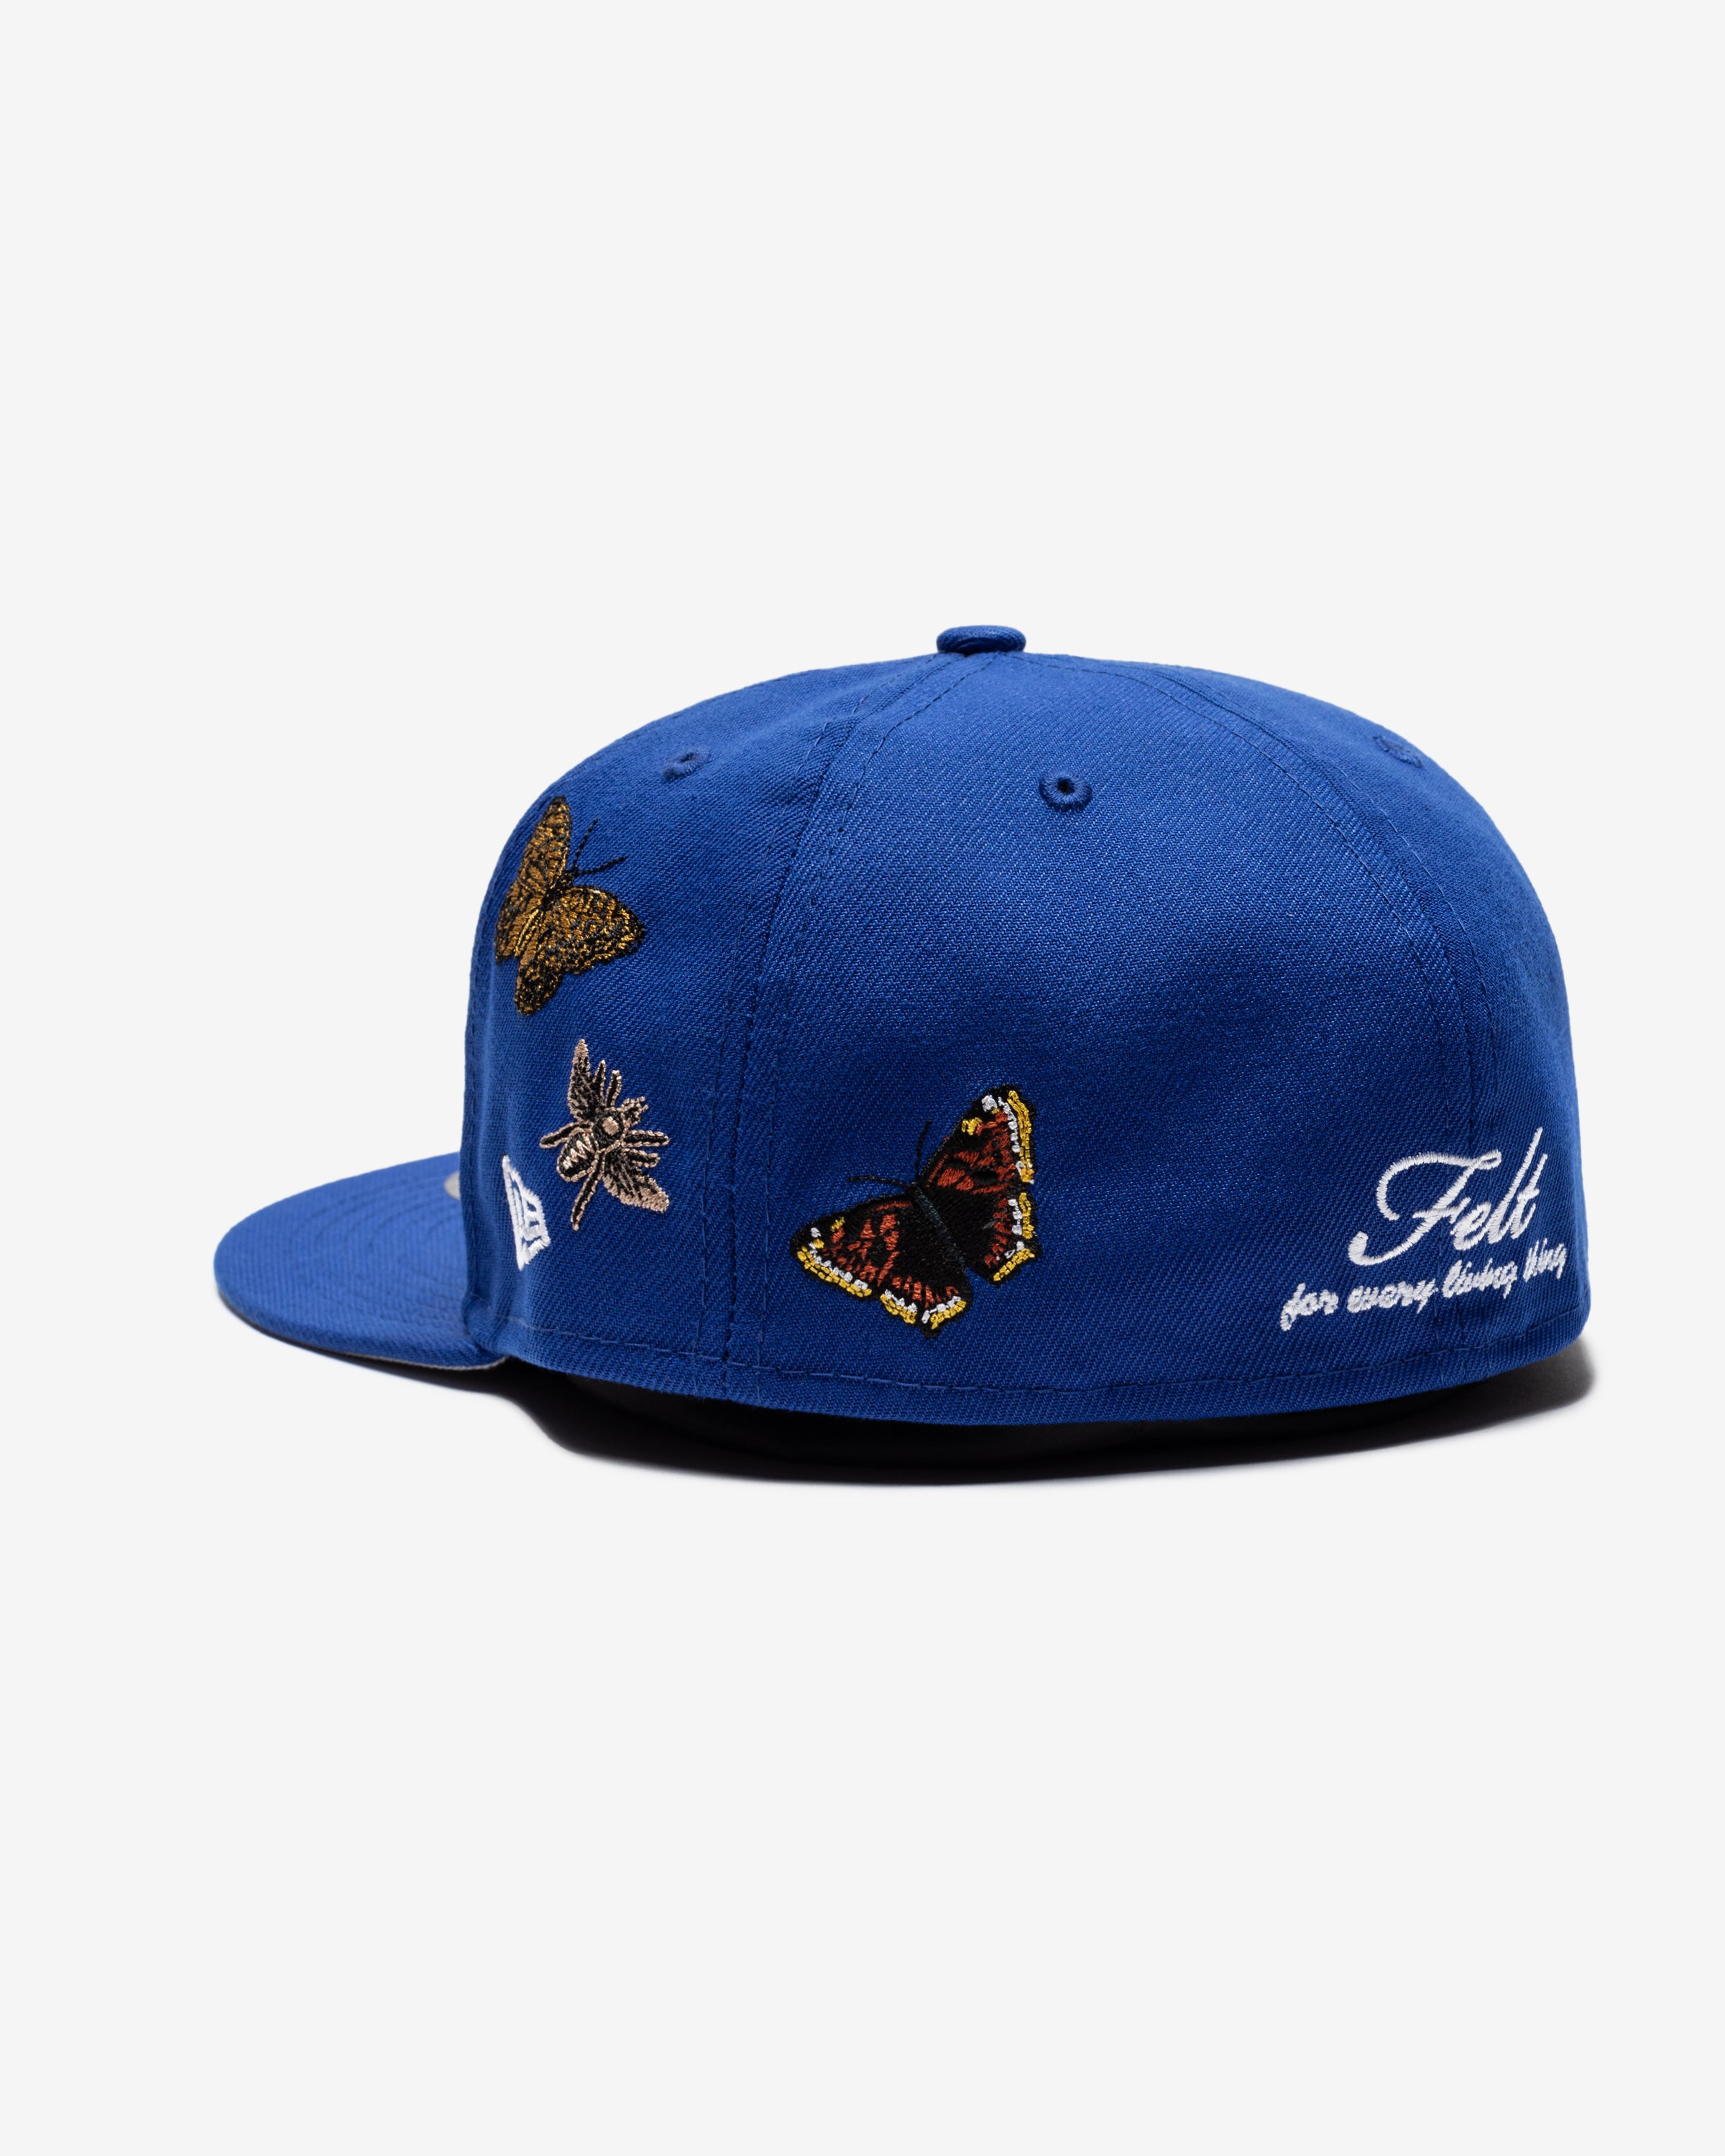 New Era Knicks 21-22 City Edition Official 5950 Hat